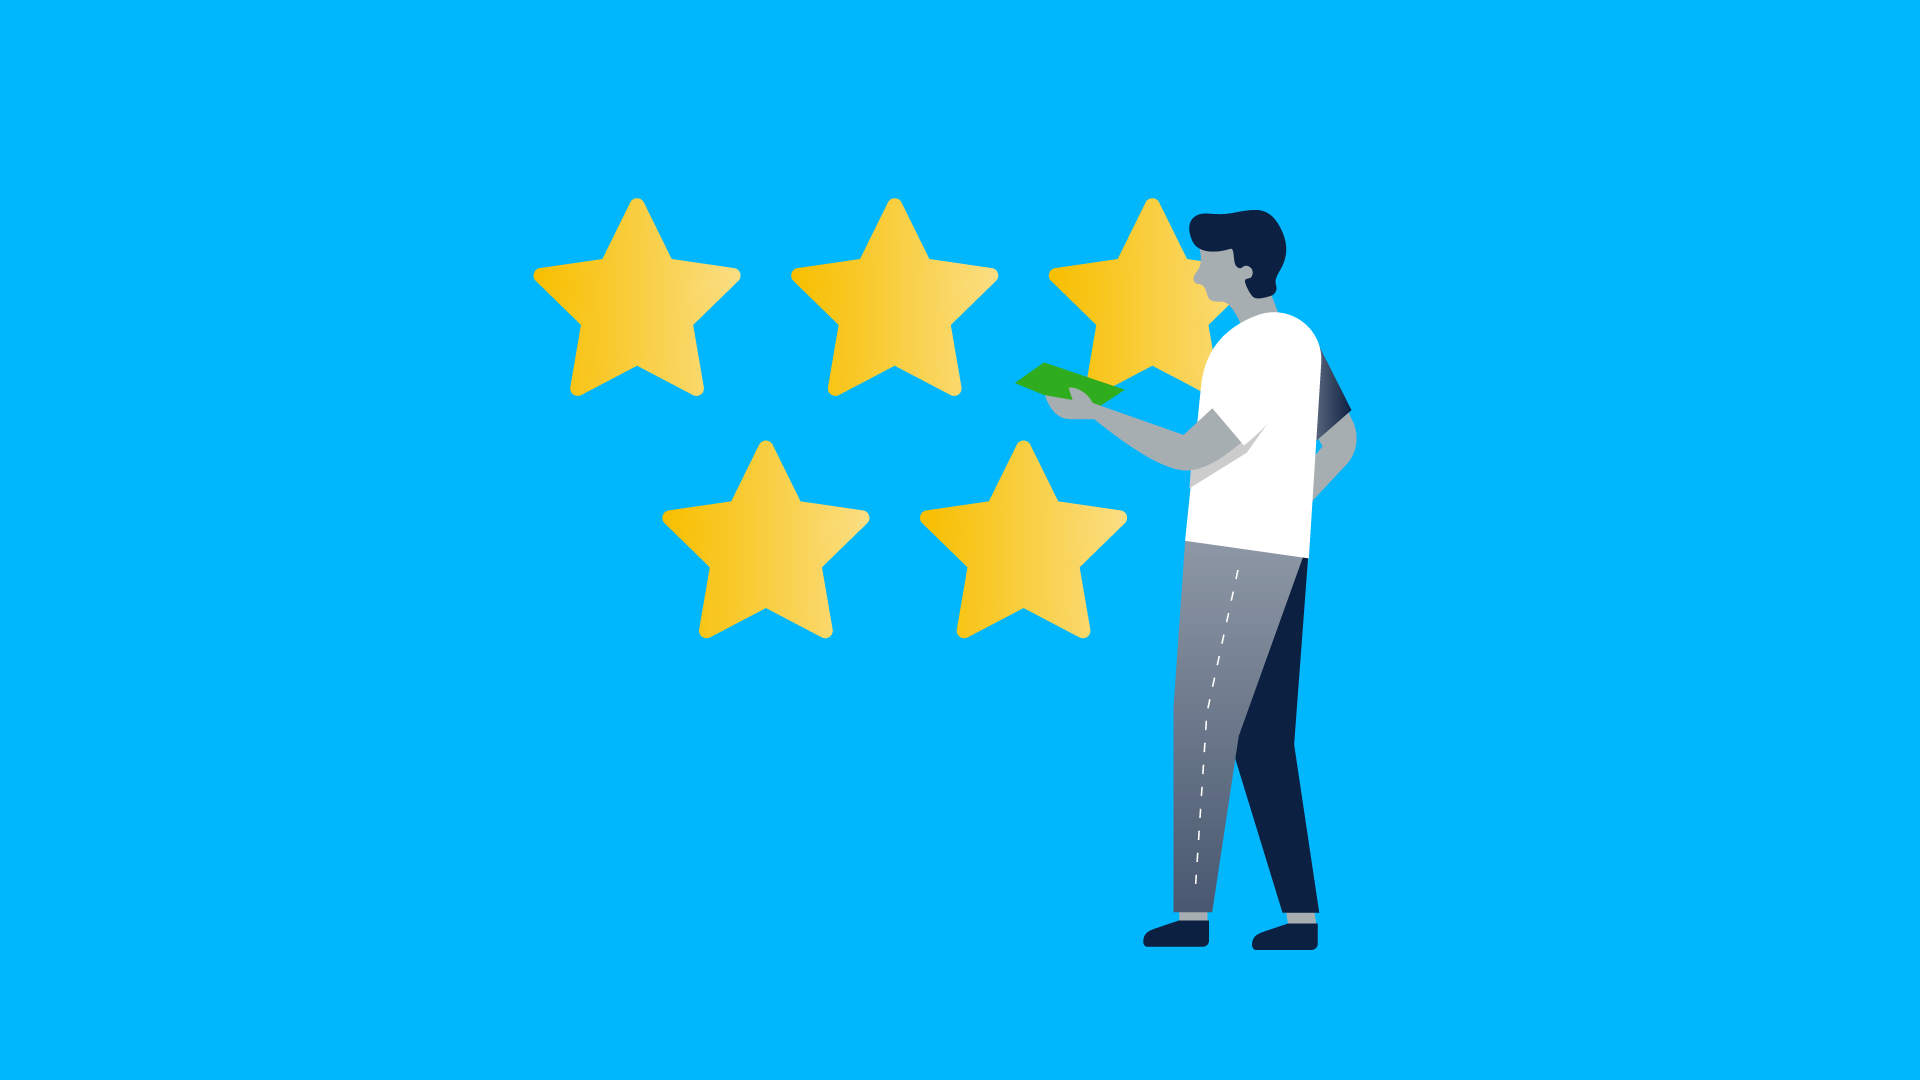 Illustration of person paying for five stars. 